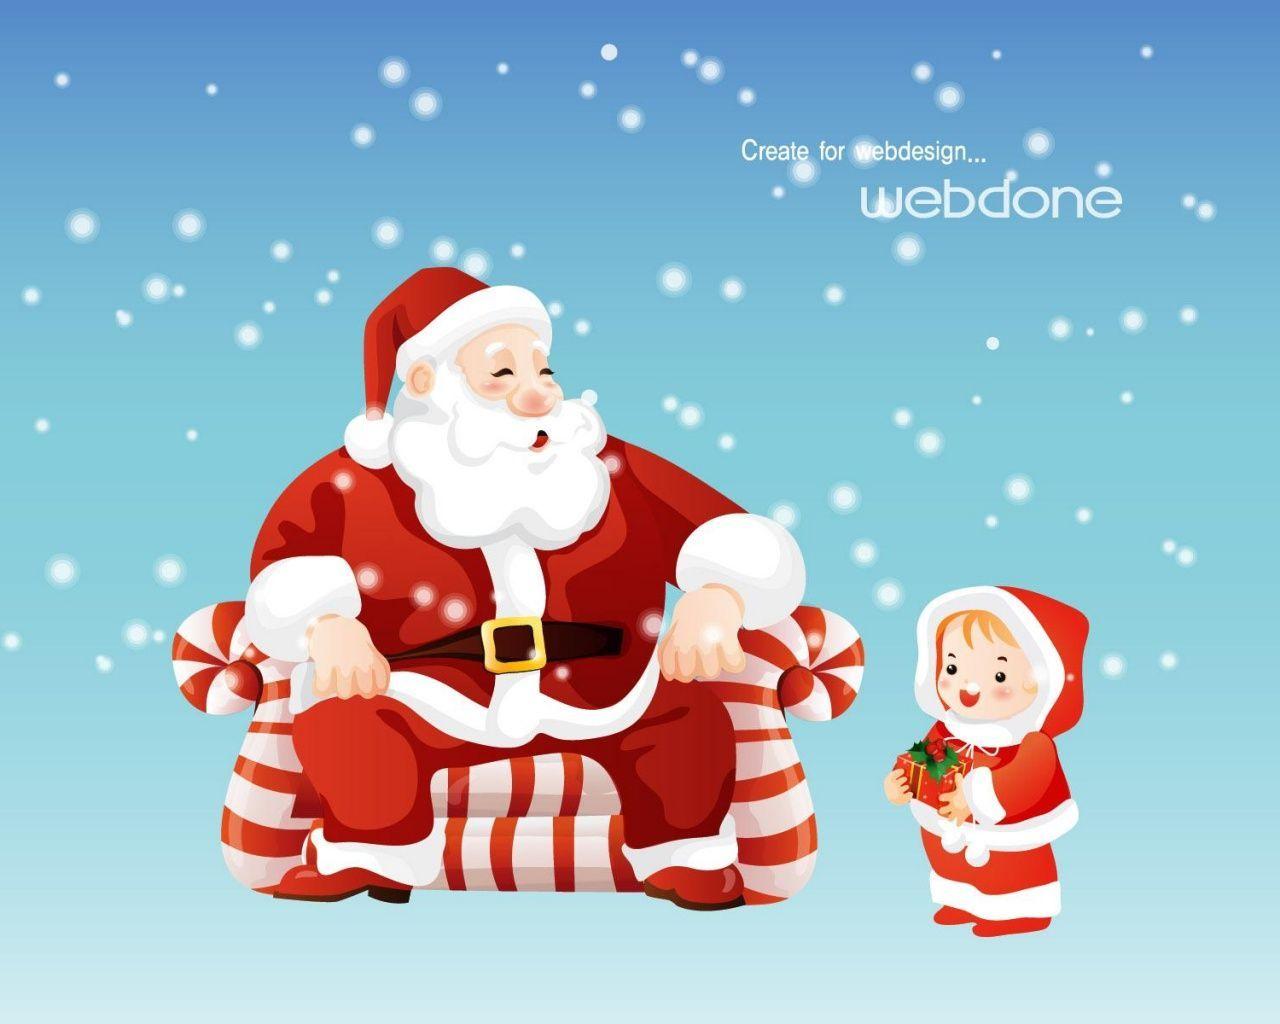 Wallpapers For > Cute Santa Claus Wallpapers